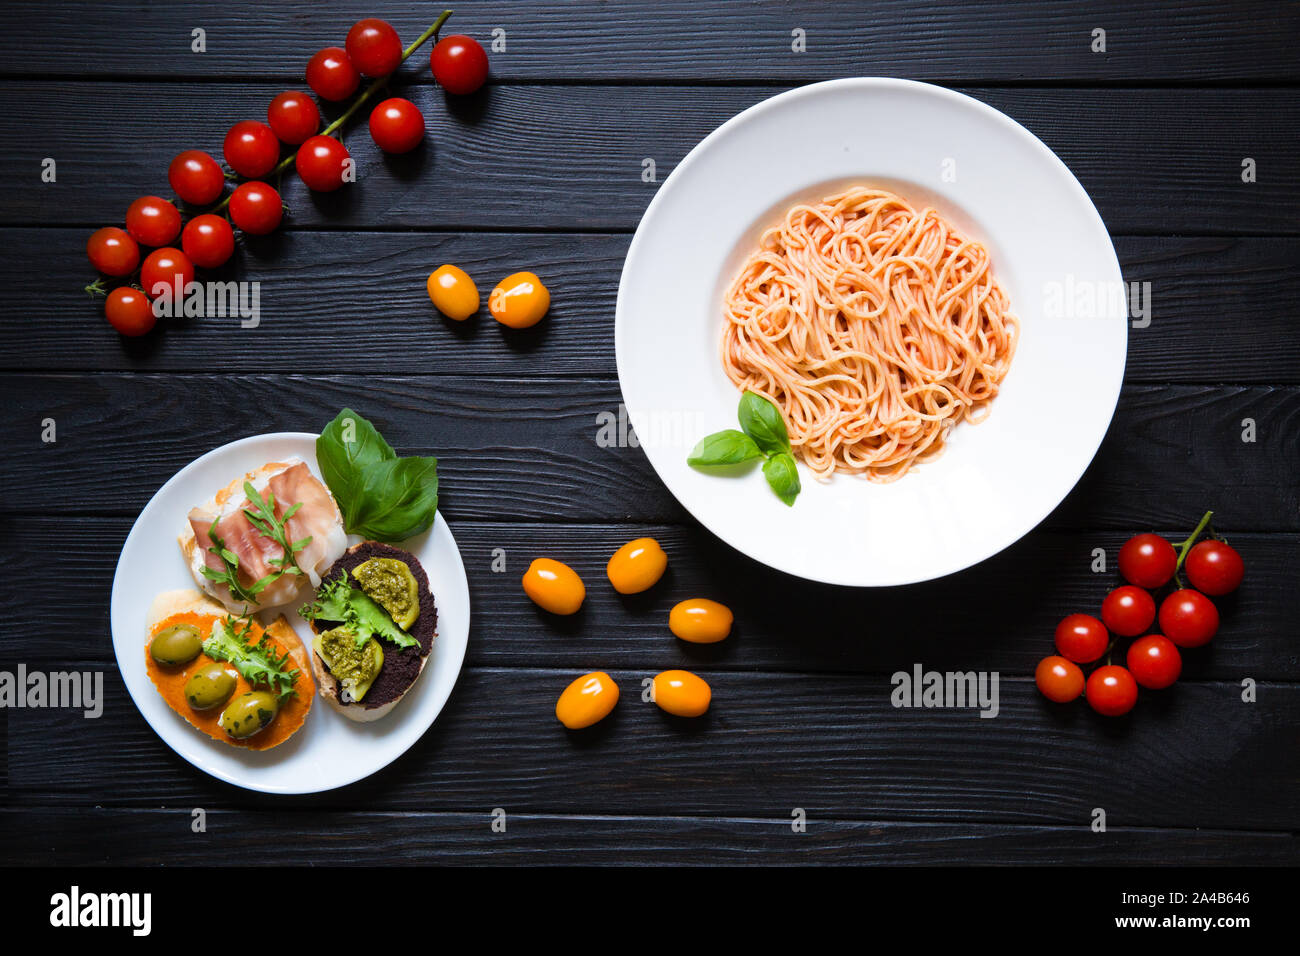 Tomato pasta with cheese, basil, red, orange and yellow cherries tomatoes on a black wooden background, top view. Bruschetta with ham and vegetables o Stock Photo